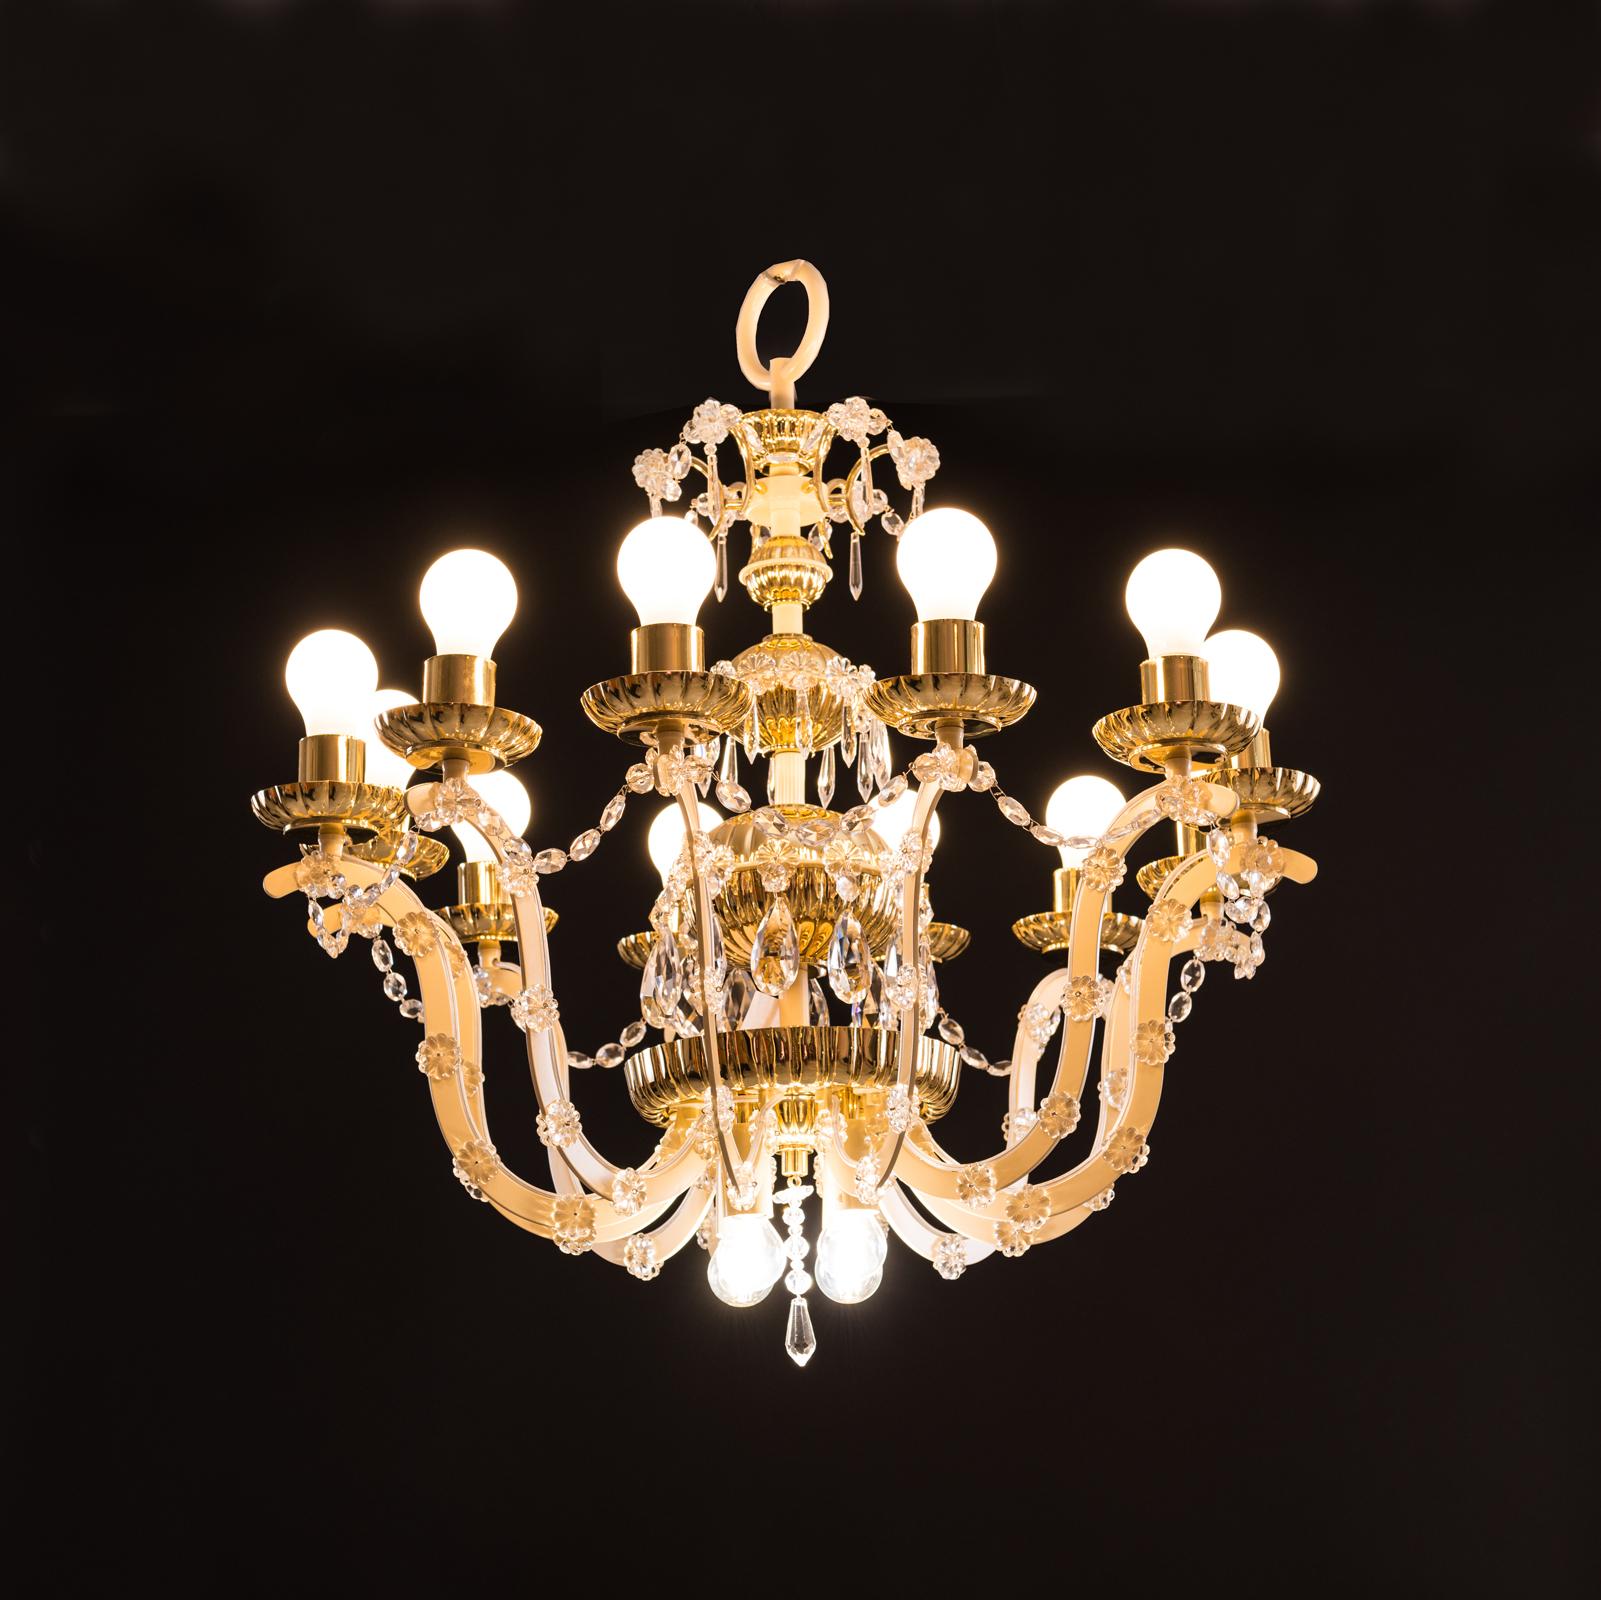 Hand-Crafted Original Mid-Century Modern Magnificent Chandelier, 1960 For Sale